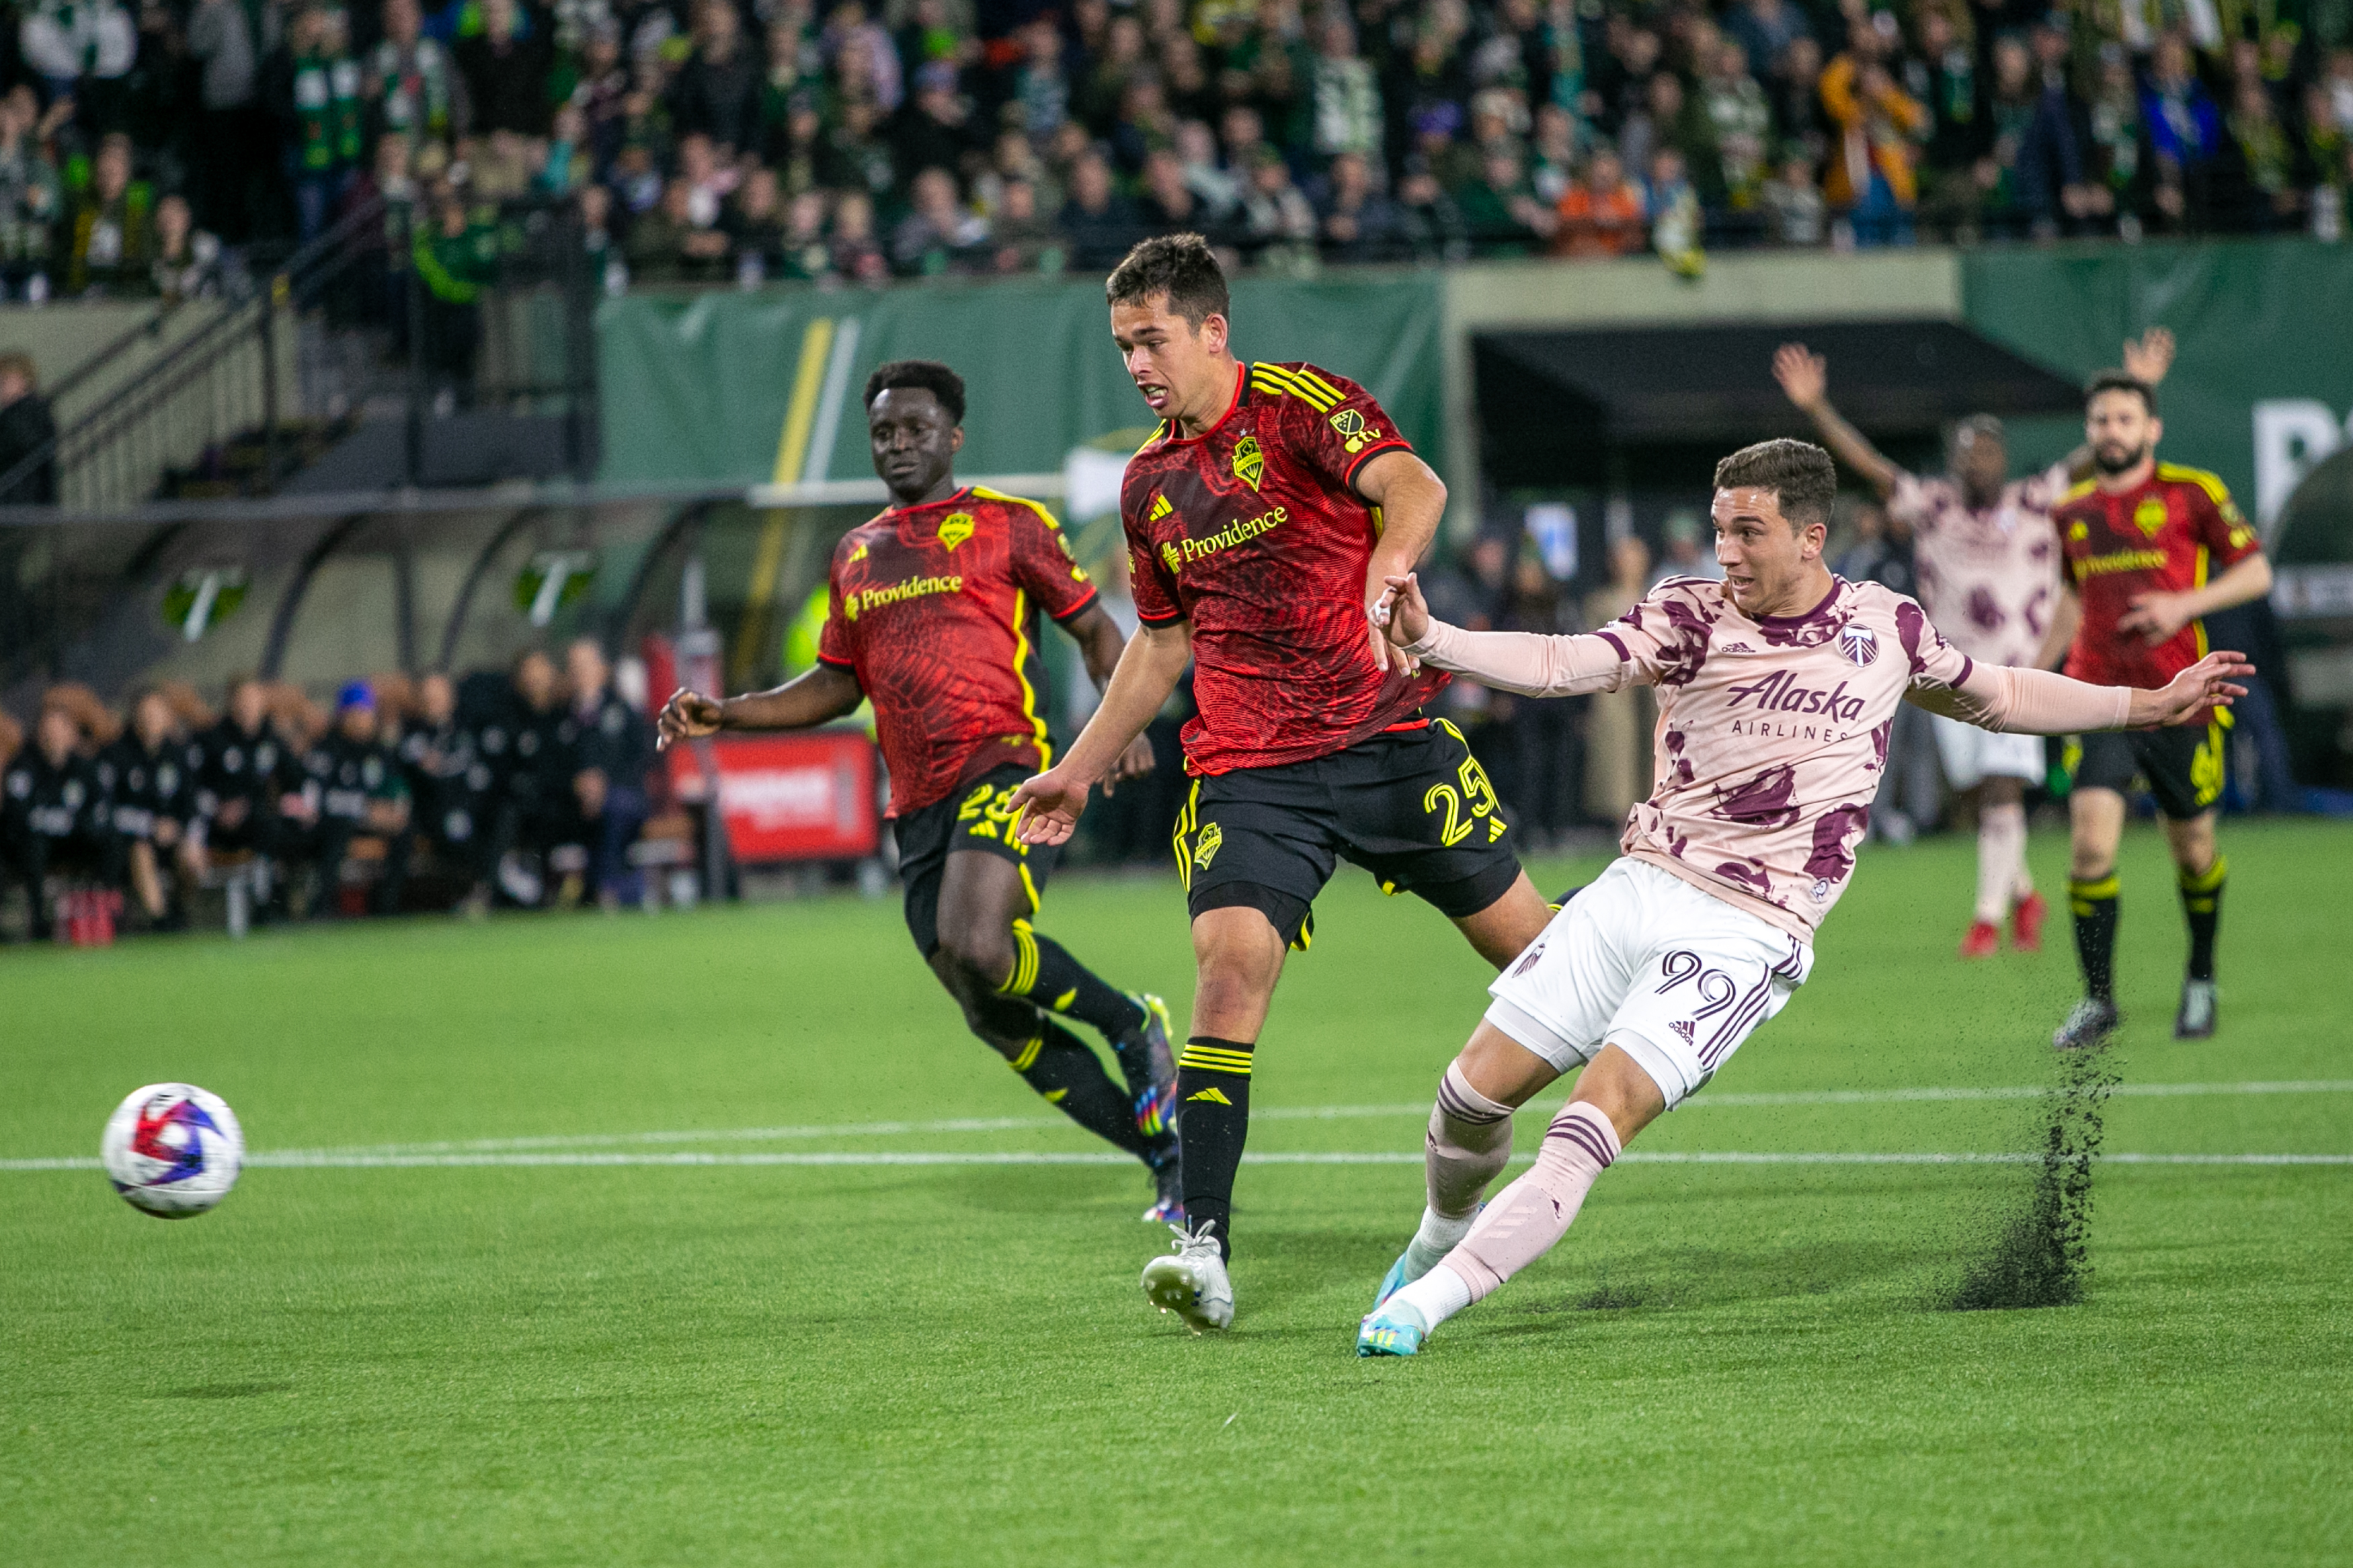 Can the Portland Timbers repeat over the Seattle Sounders?